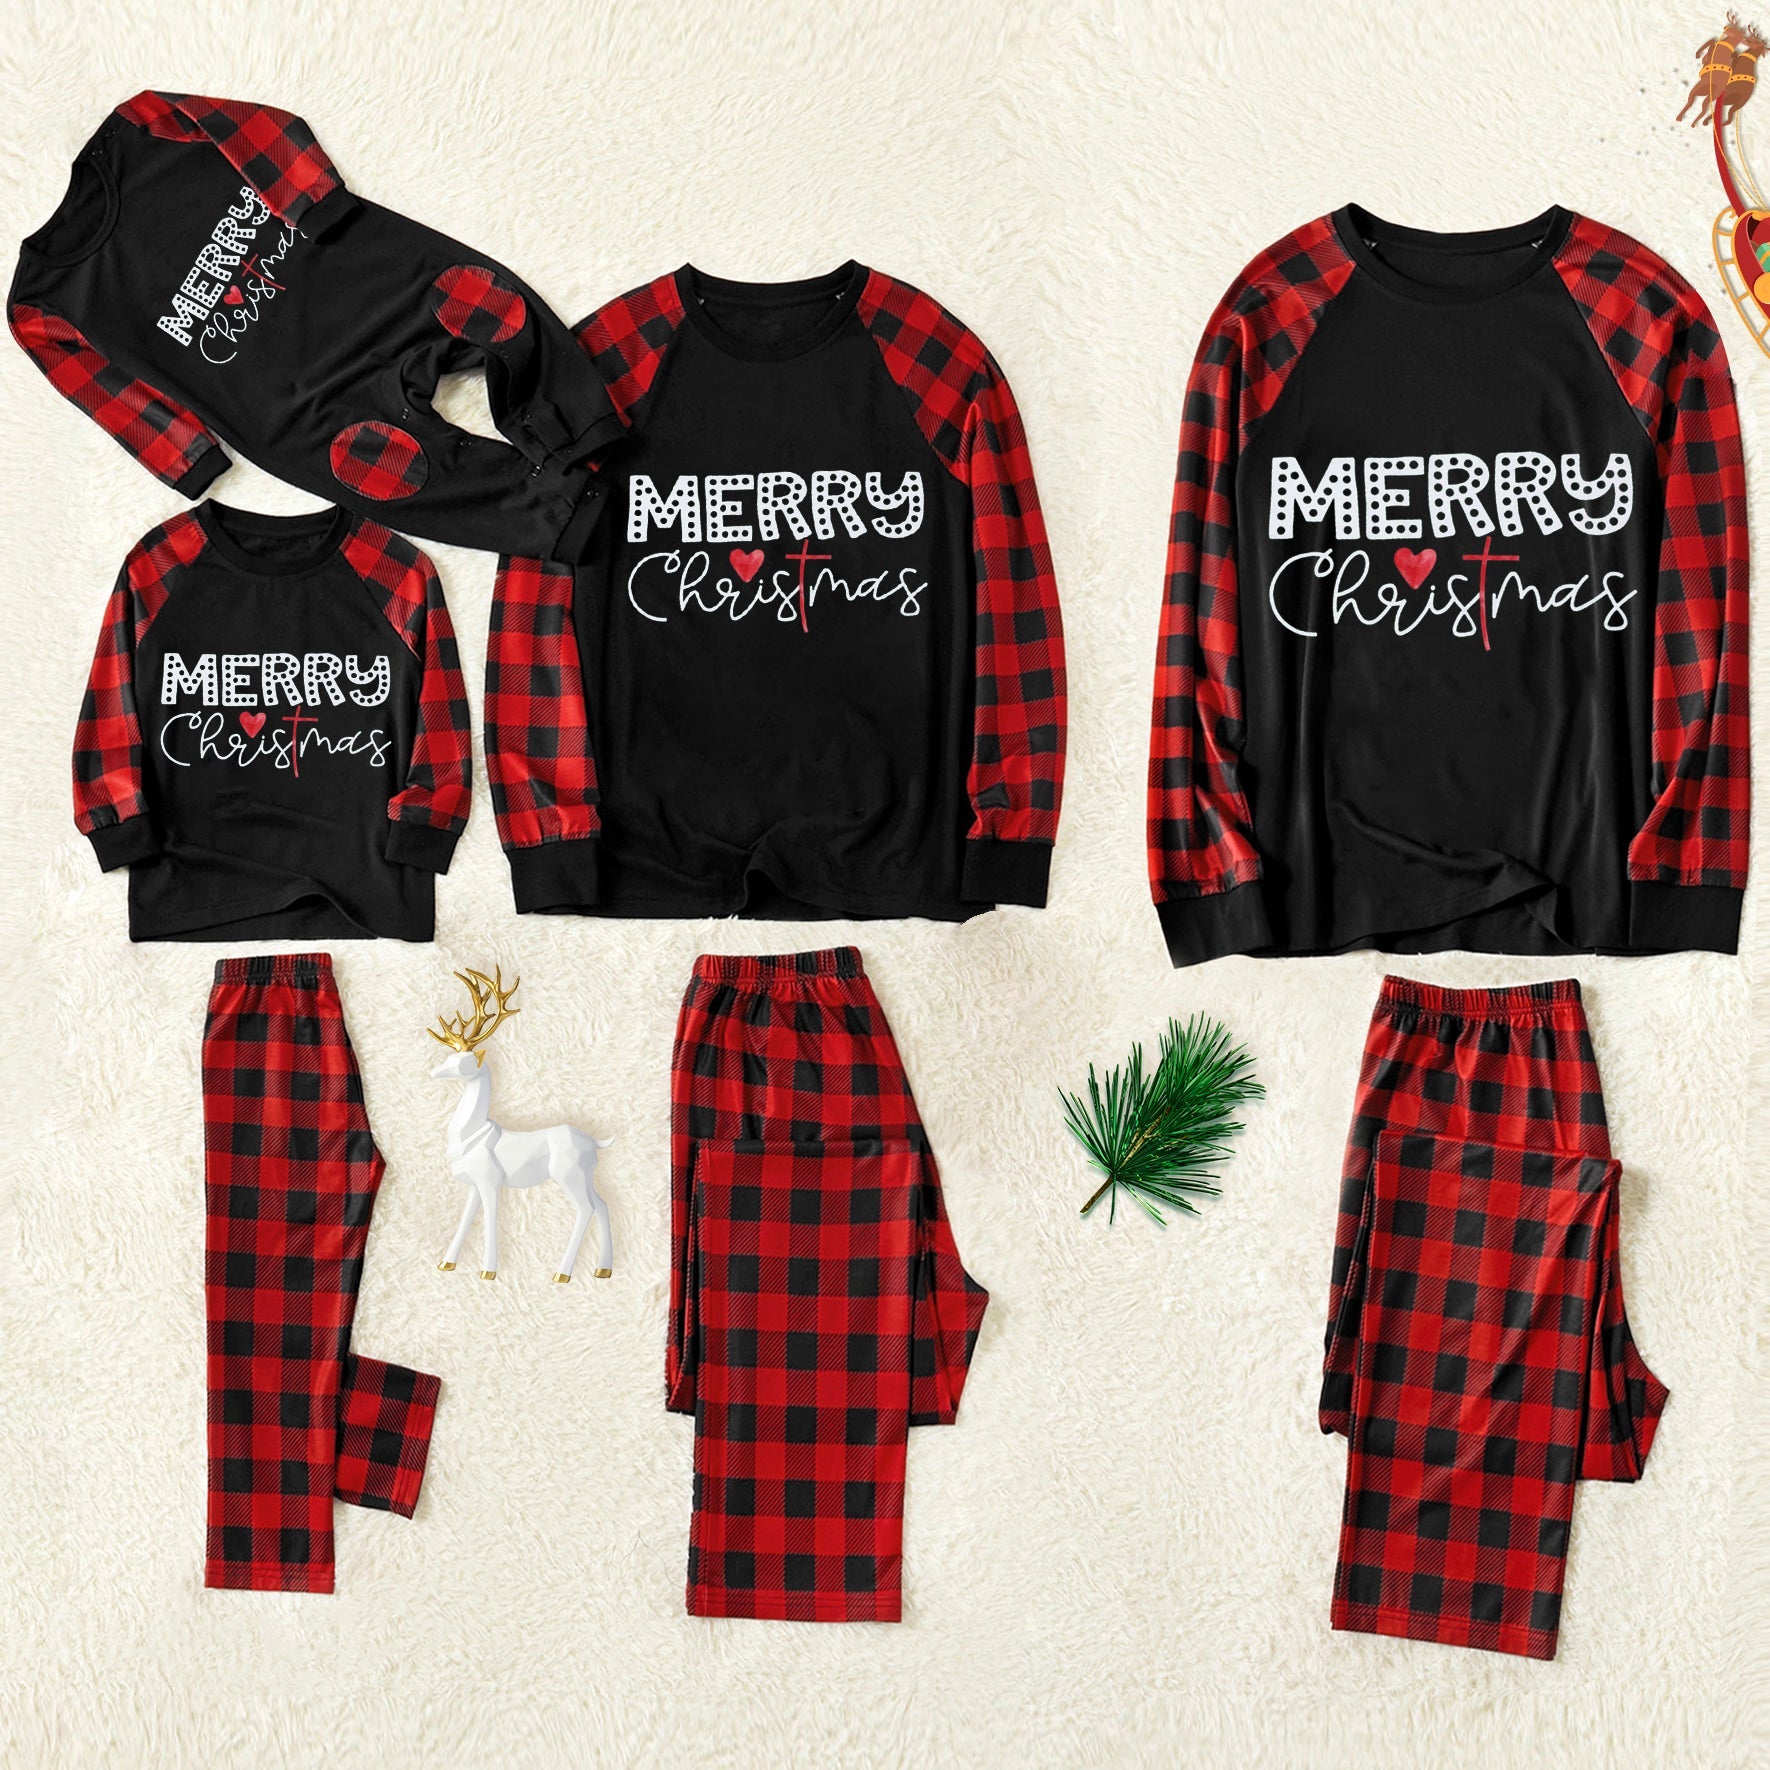 'Merry Christmas' Letter Print Love Patterned  Contrast Black top and Black & Red Plaid Pants Family Matching Pajamas Set With Dog Bandana